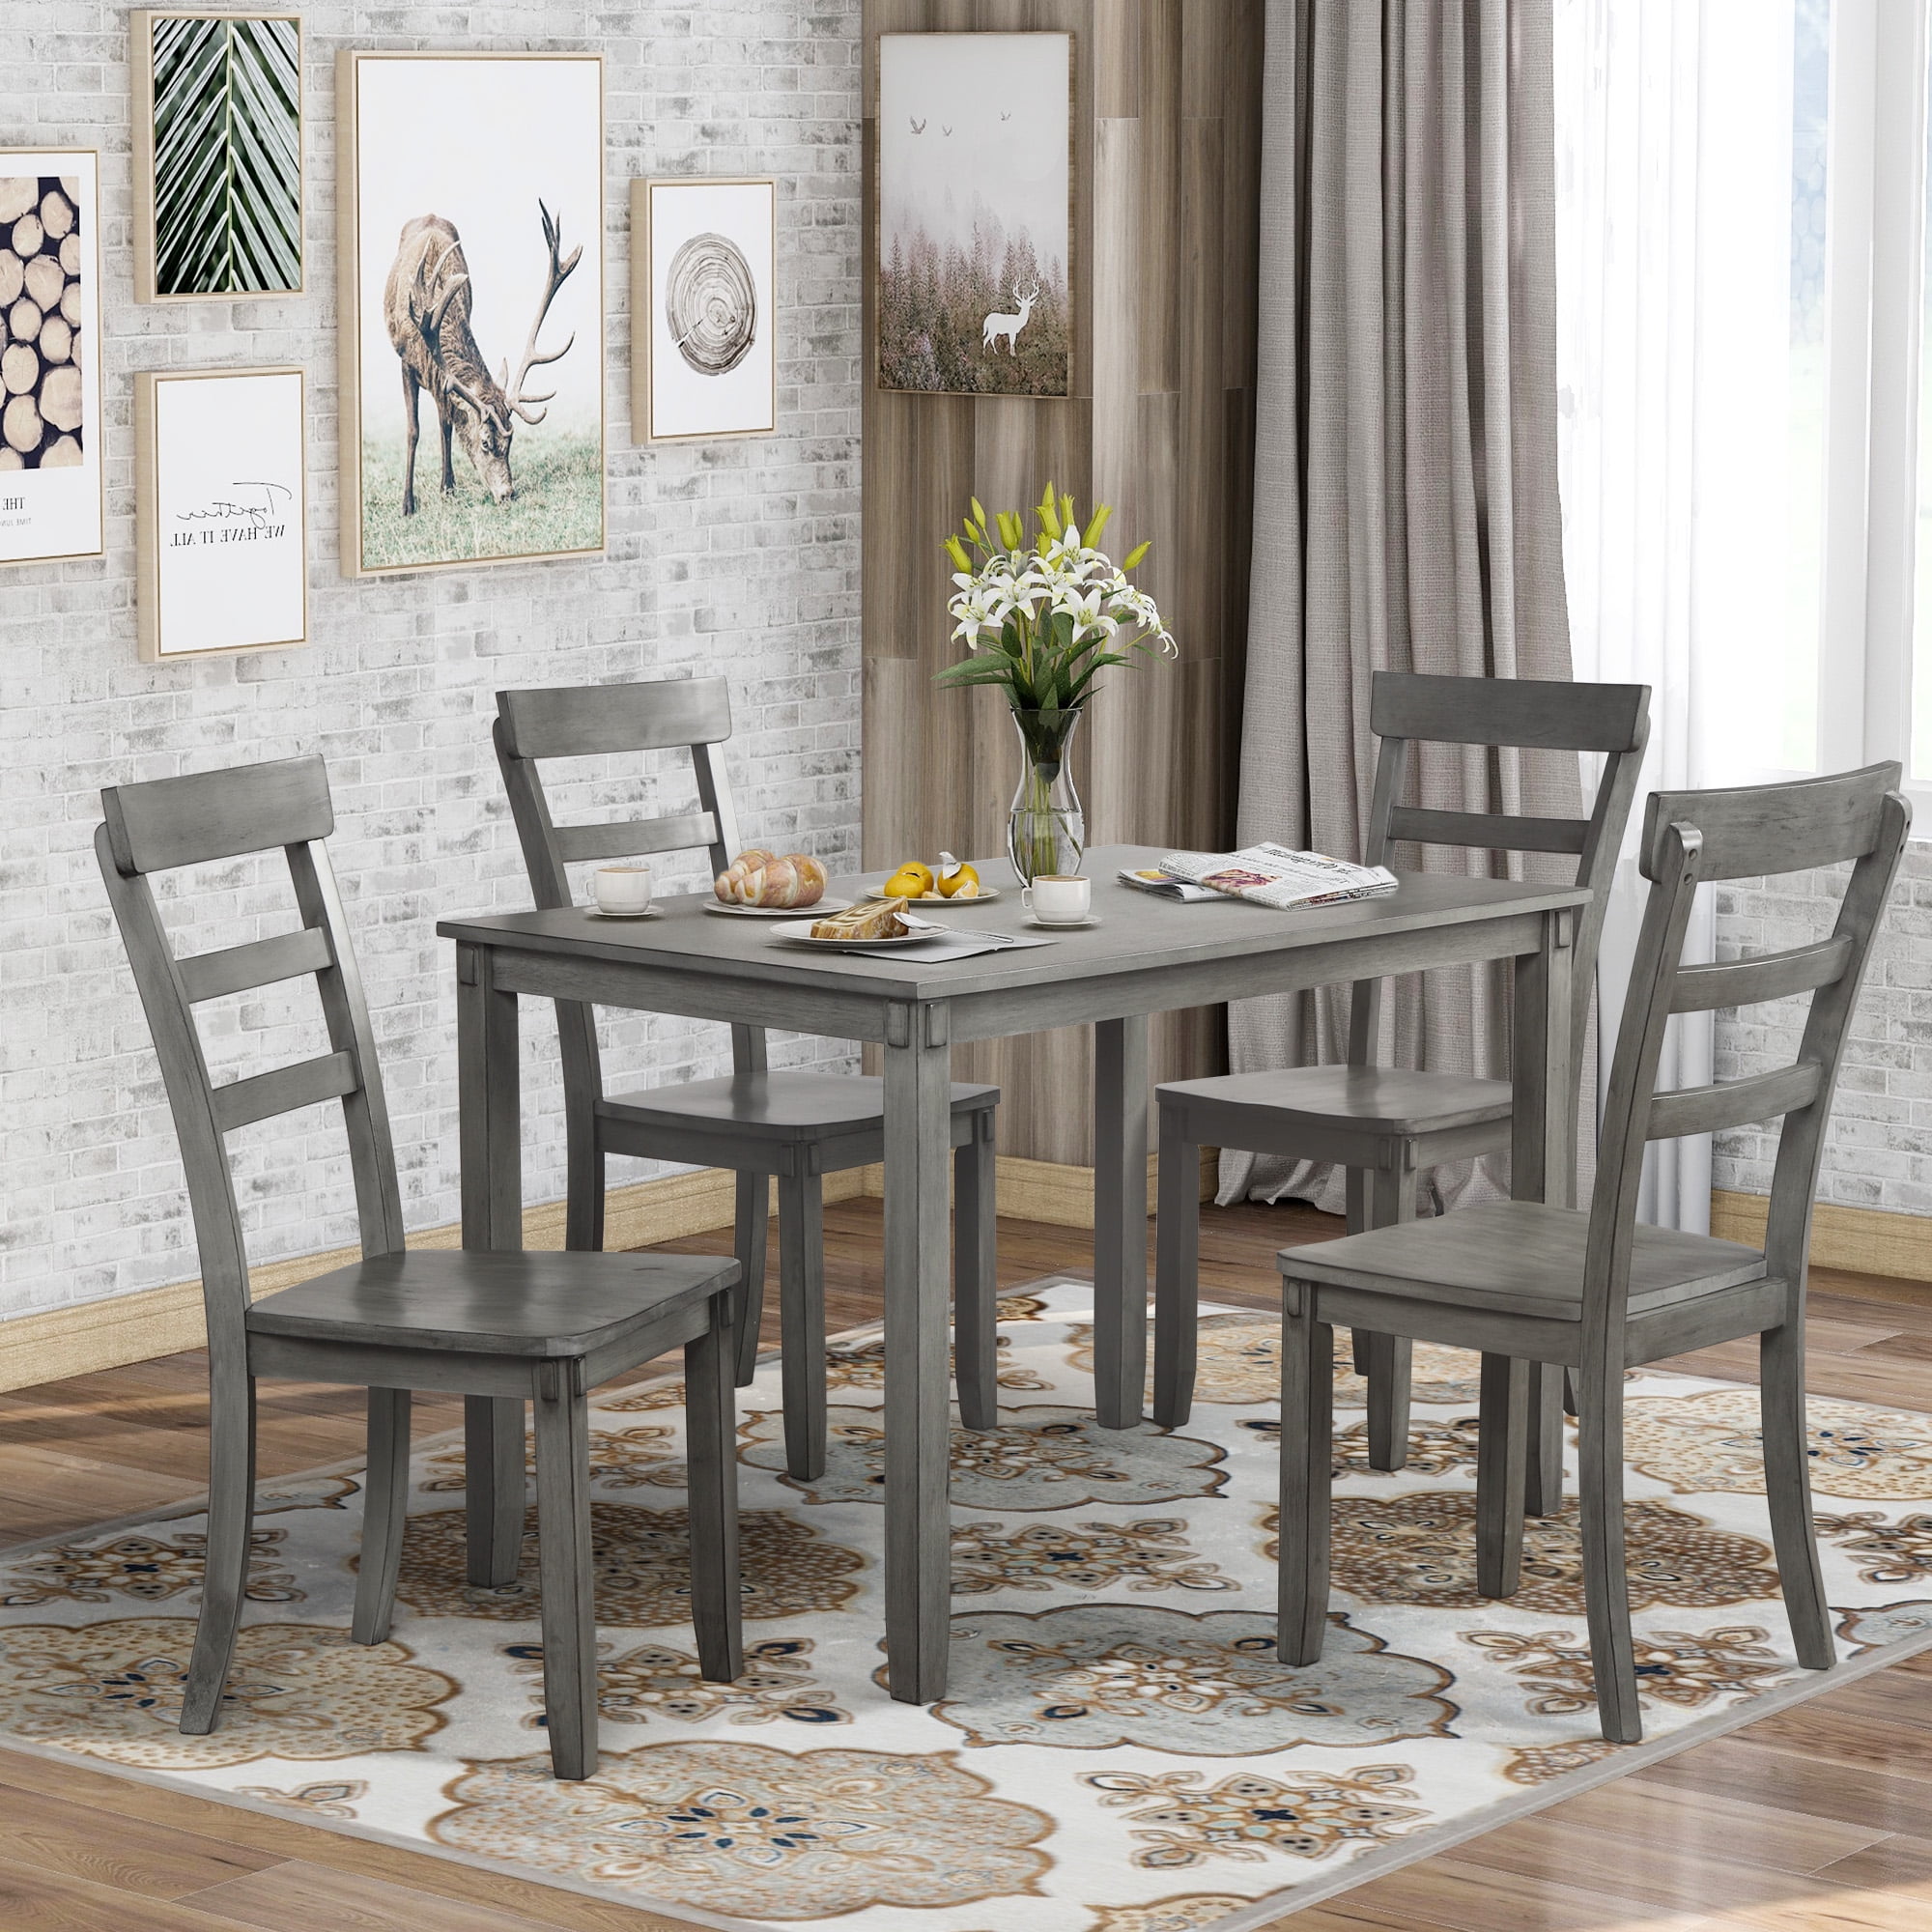 Square Kitchen Table With 4 Chairs – Things In The Kitchen